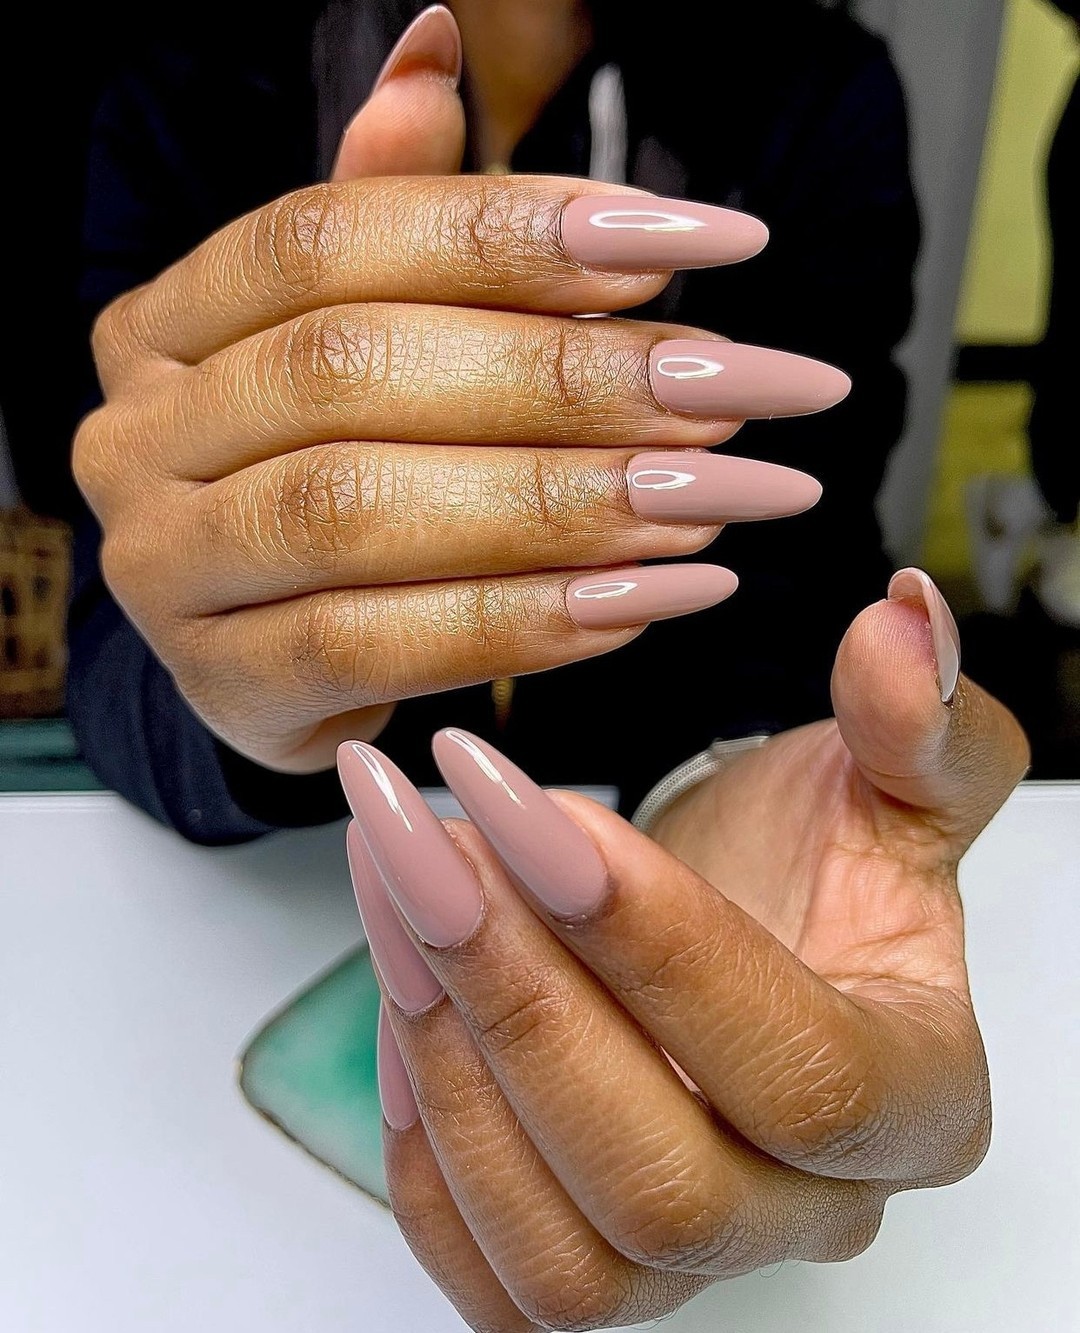 18 of Our Favorite Nail Polish Colors for Dark Skin Tones - Emily CottonTop